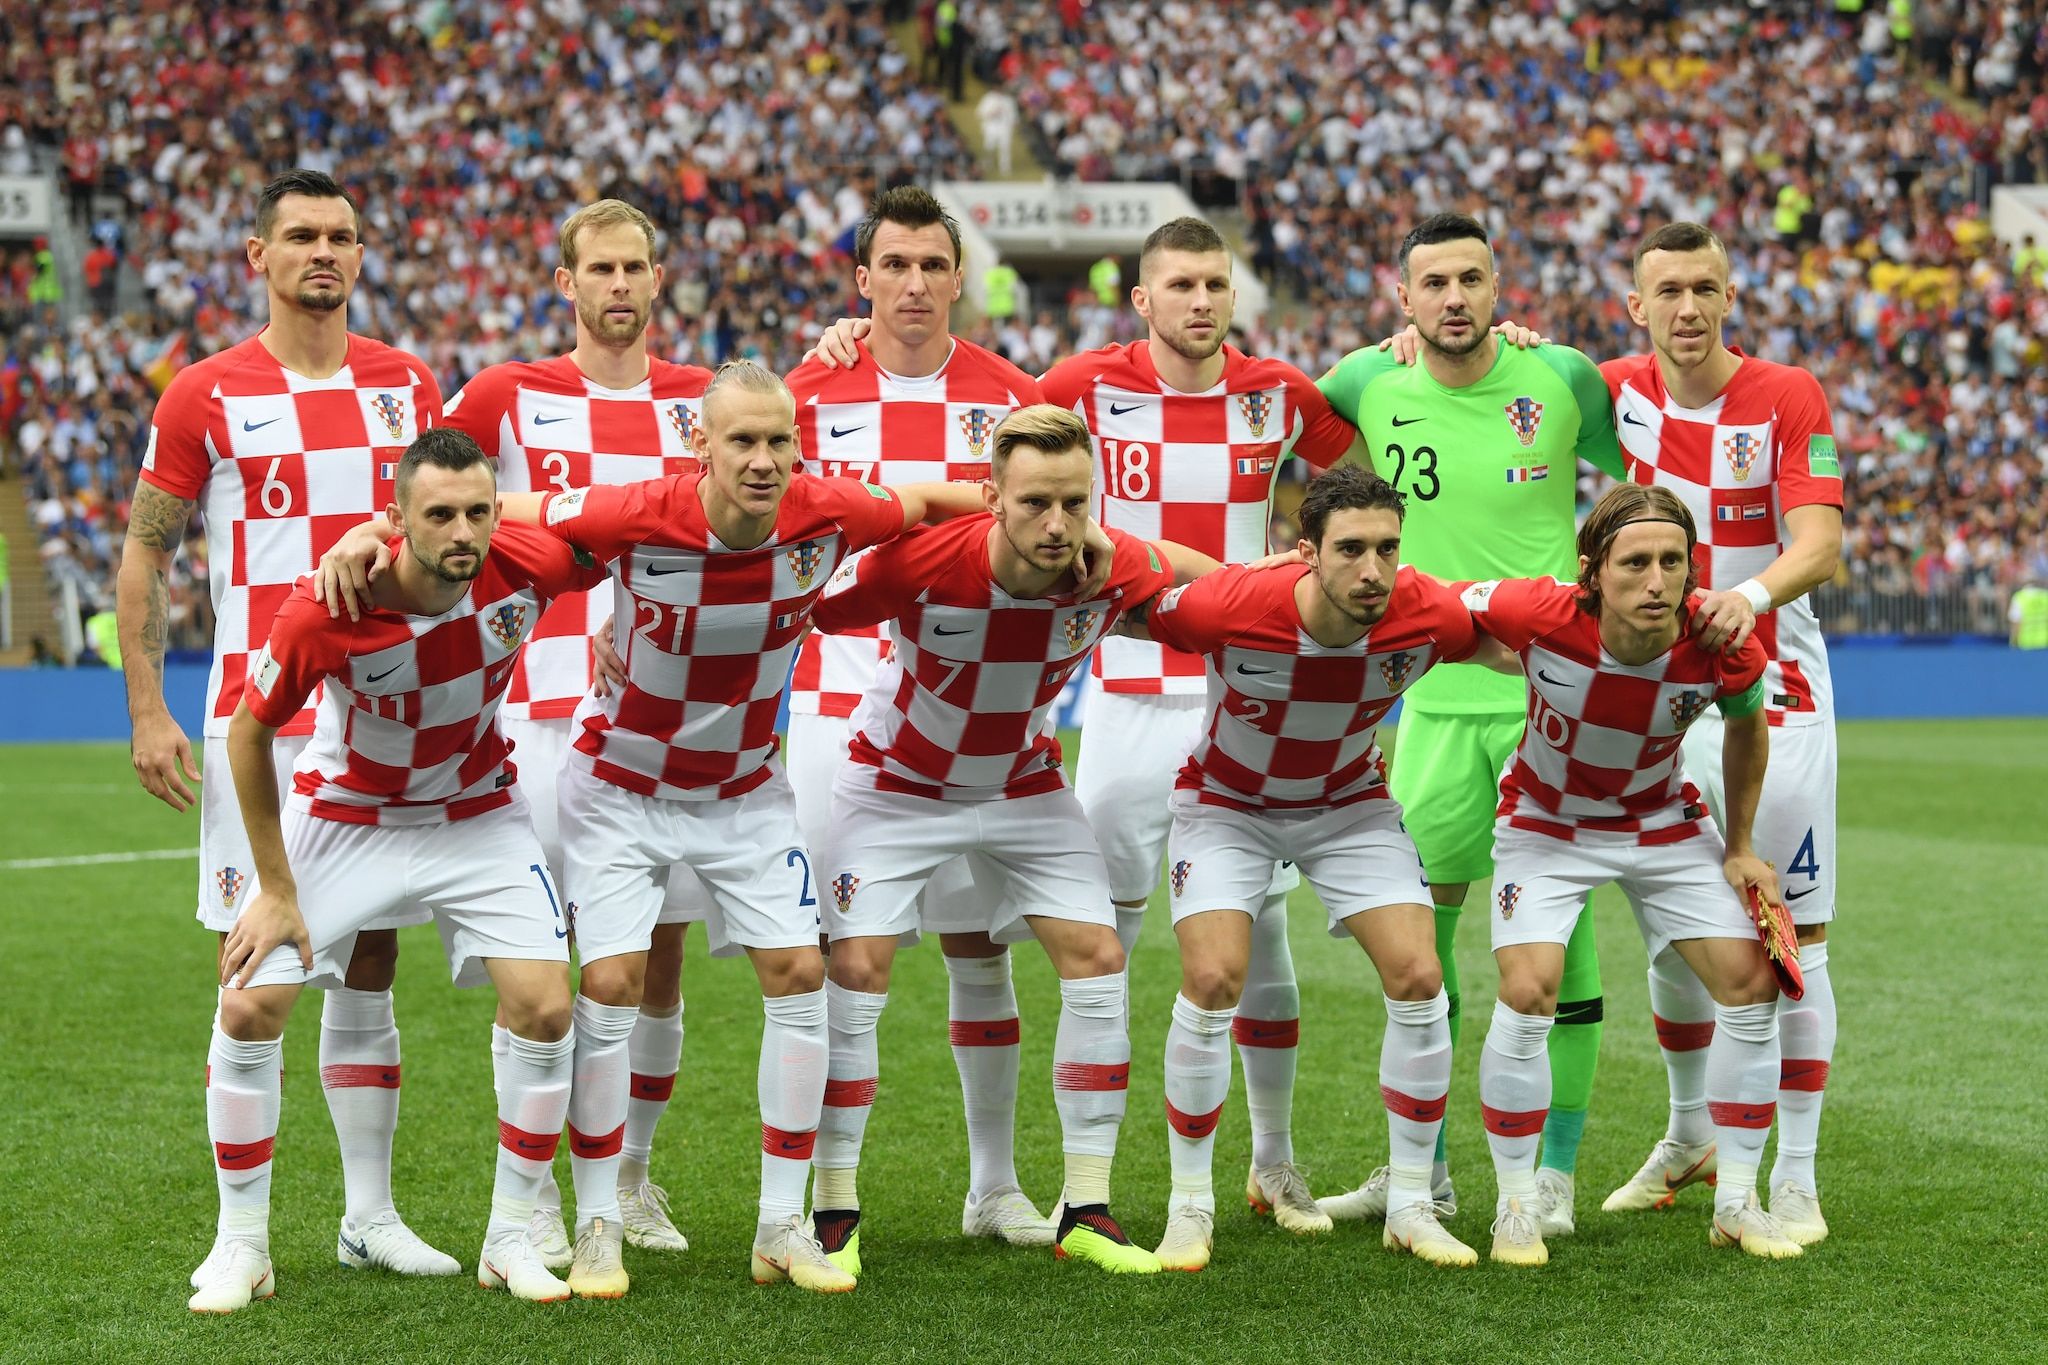 Croatia at the Qatar World Cup 2022 Group, Schedule of Matches, Star players, Roster, and Coach